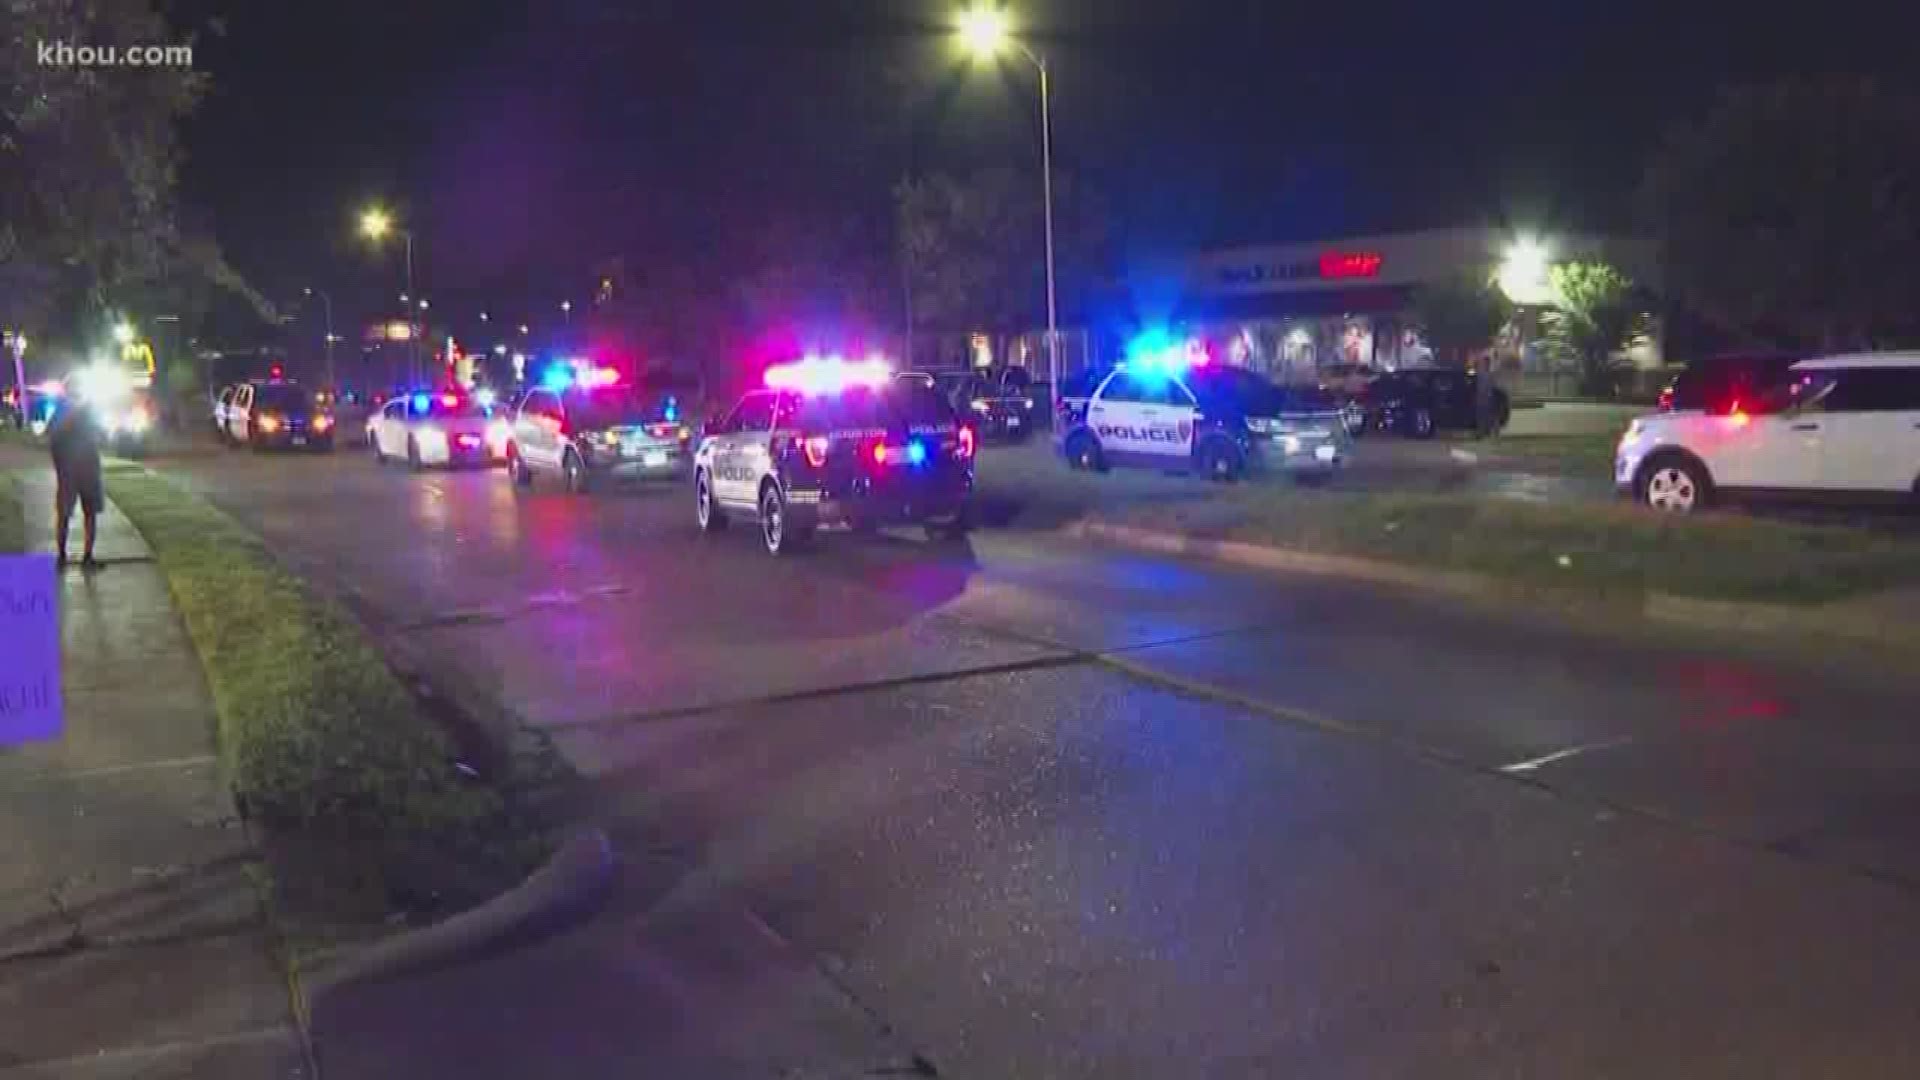 A Houston Police officer was shot Thursday night on the southeast side. The shooting happened around 10:30 p.m. Thursday at Scott and Tristan. The 29-year-old officer and 5-year HPD veteran was transported to Memorial Hermann Hospital where he underwent surgery.